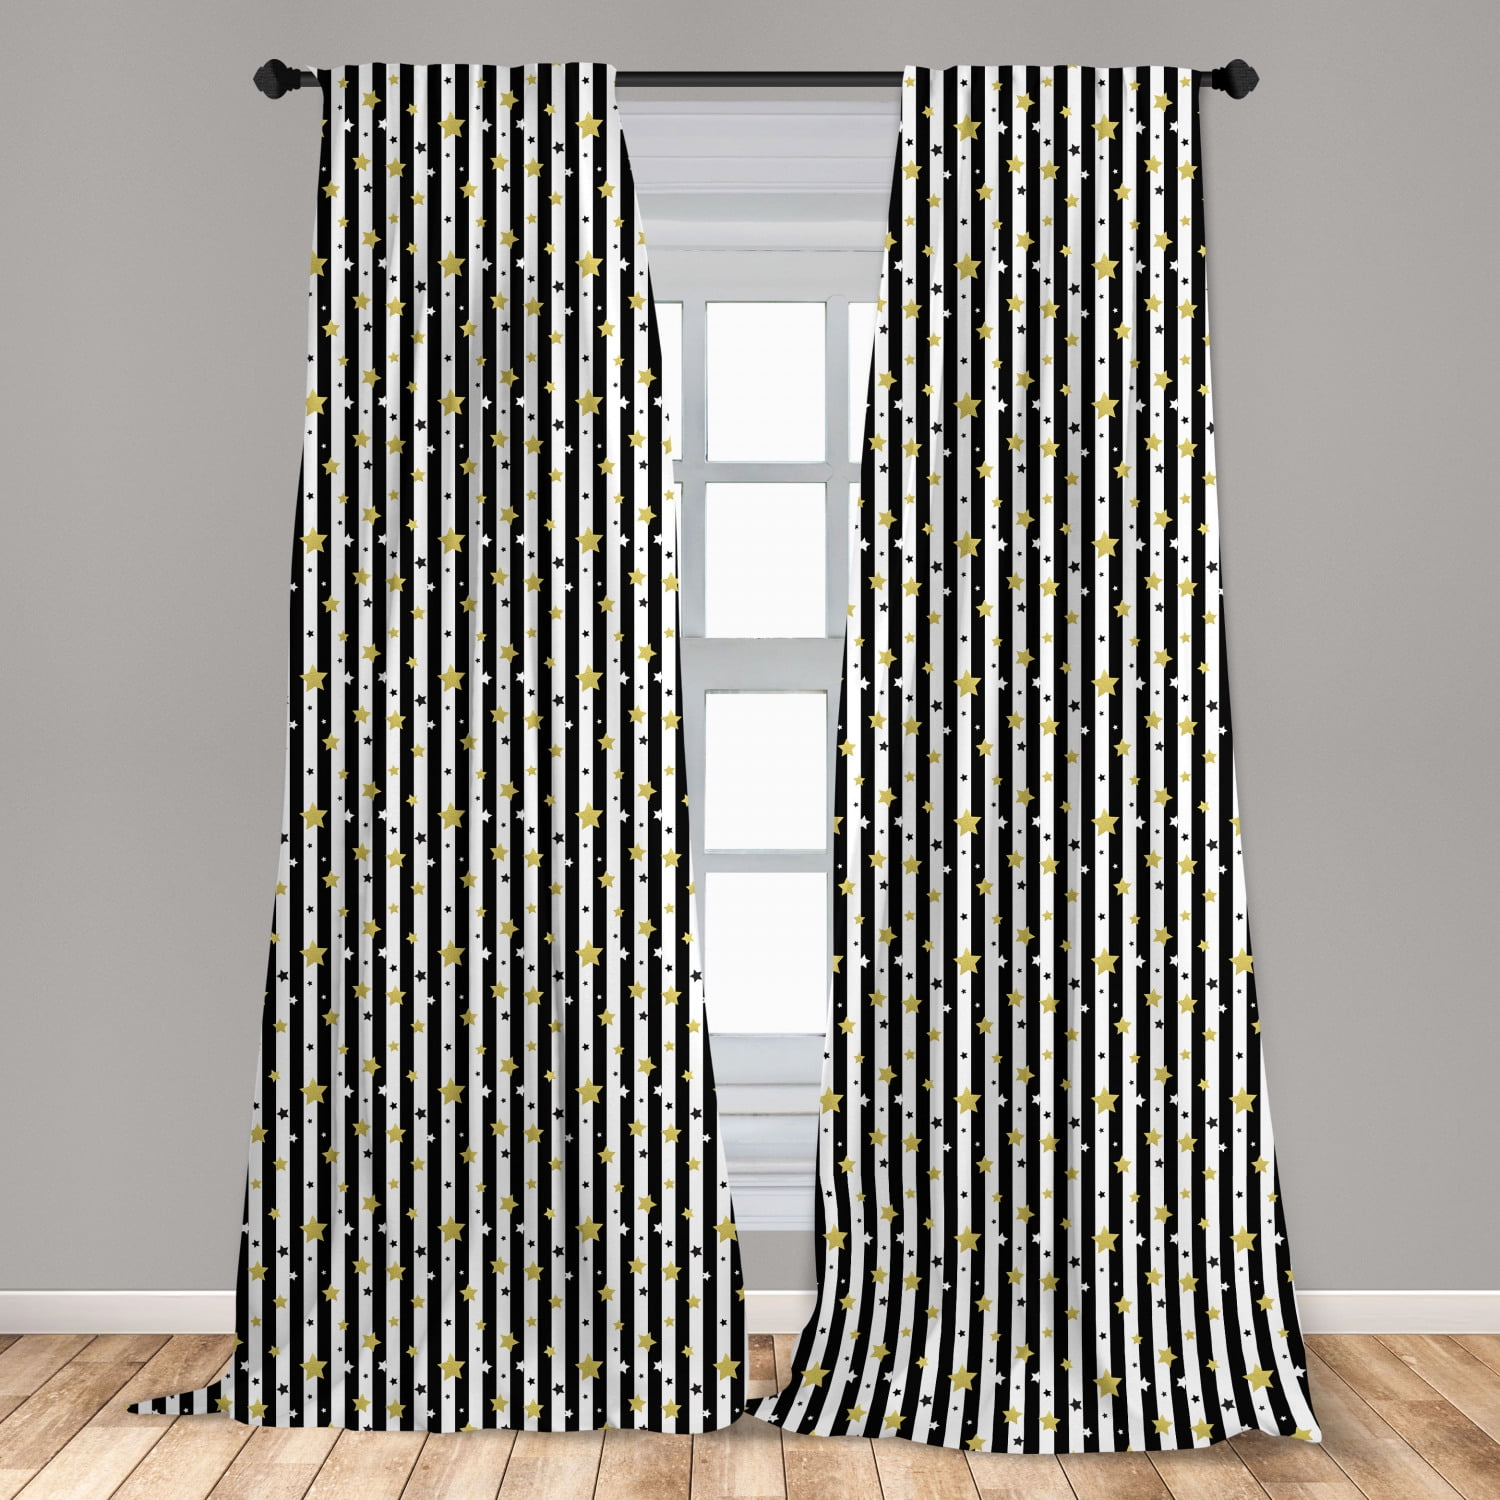 2 Panels Set Foil Print Striped Curtains for Living Room Bedroom Beige and Gold, 2 x 54Wx84L